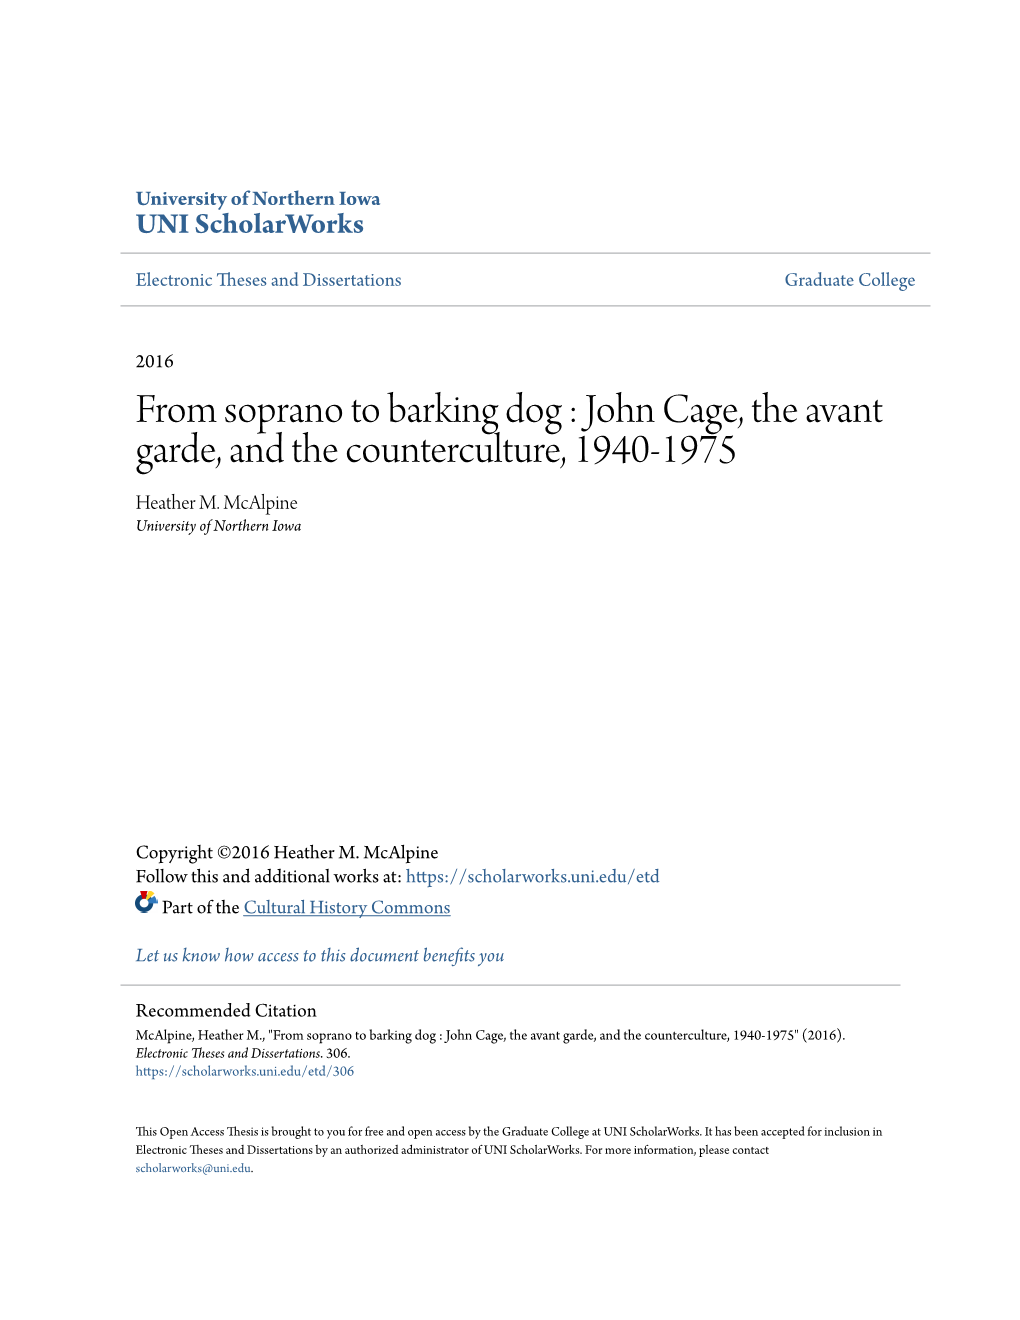 From Soprano to Barking Dog : John Cage, the Avant Garde, and the Counterculture, 1940-1975 Heather M